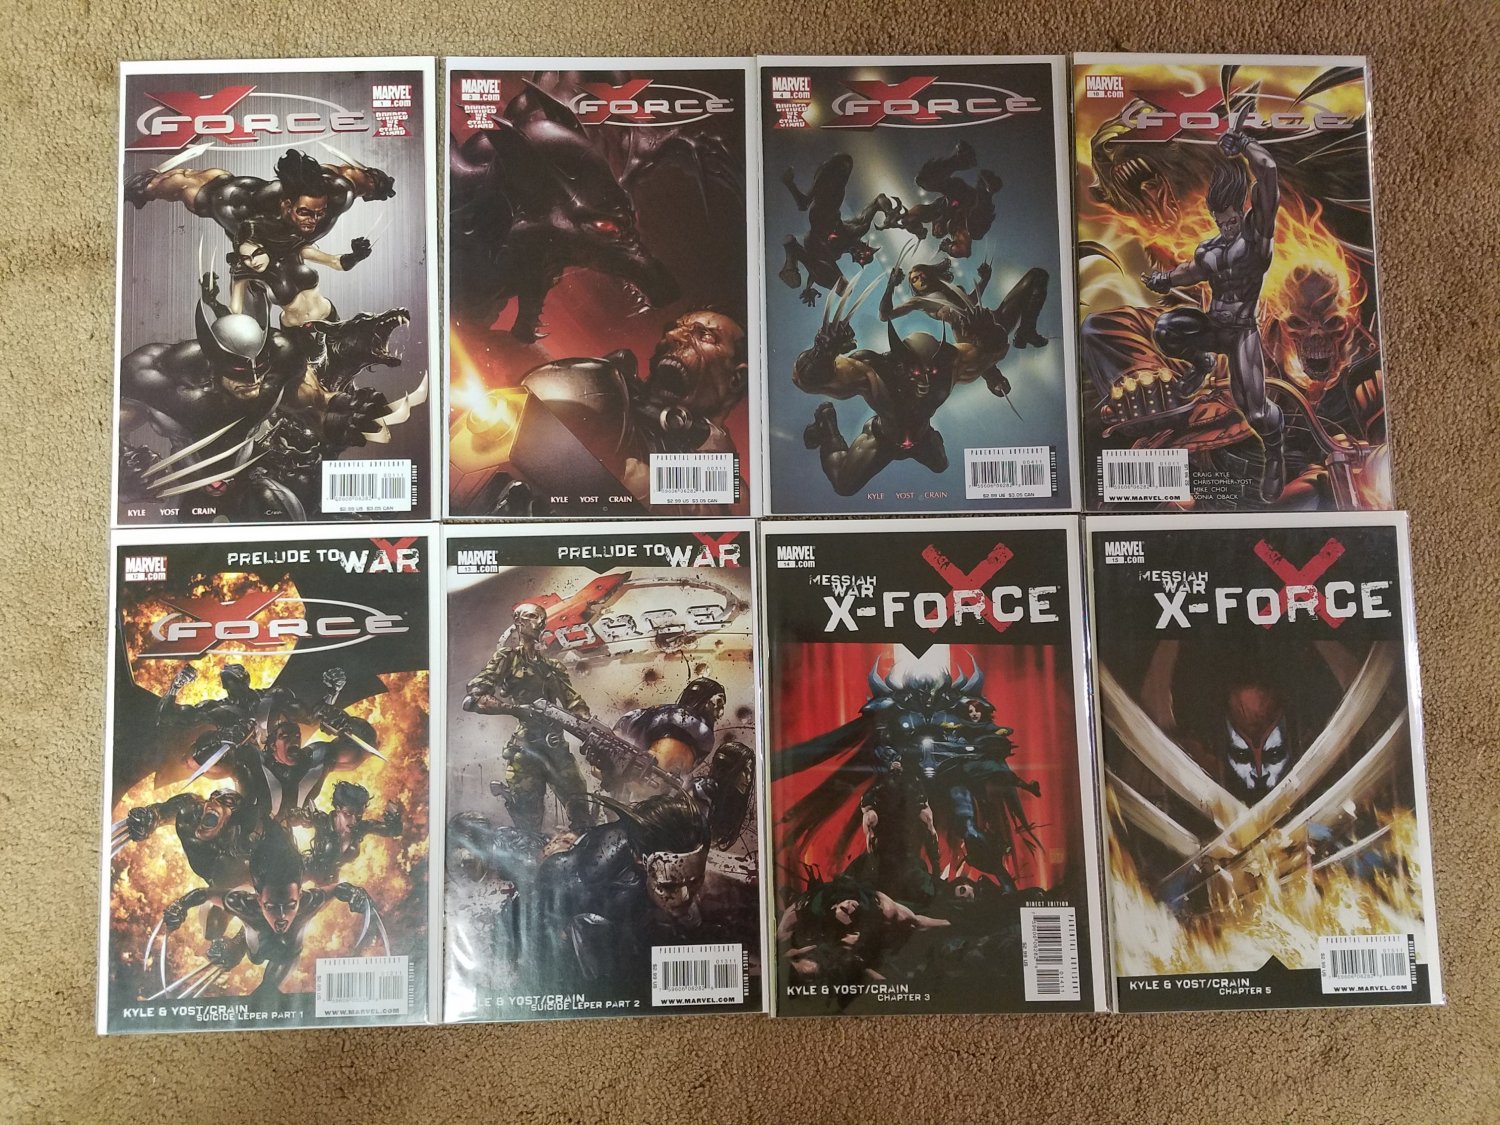 X-FORCE (2008) 20 Book lot 1-28 Annual #1 see my description *Free shipping with this lot*